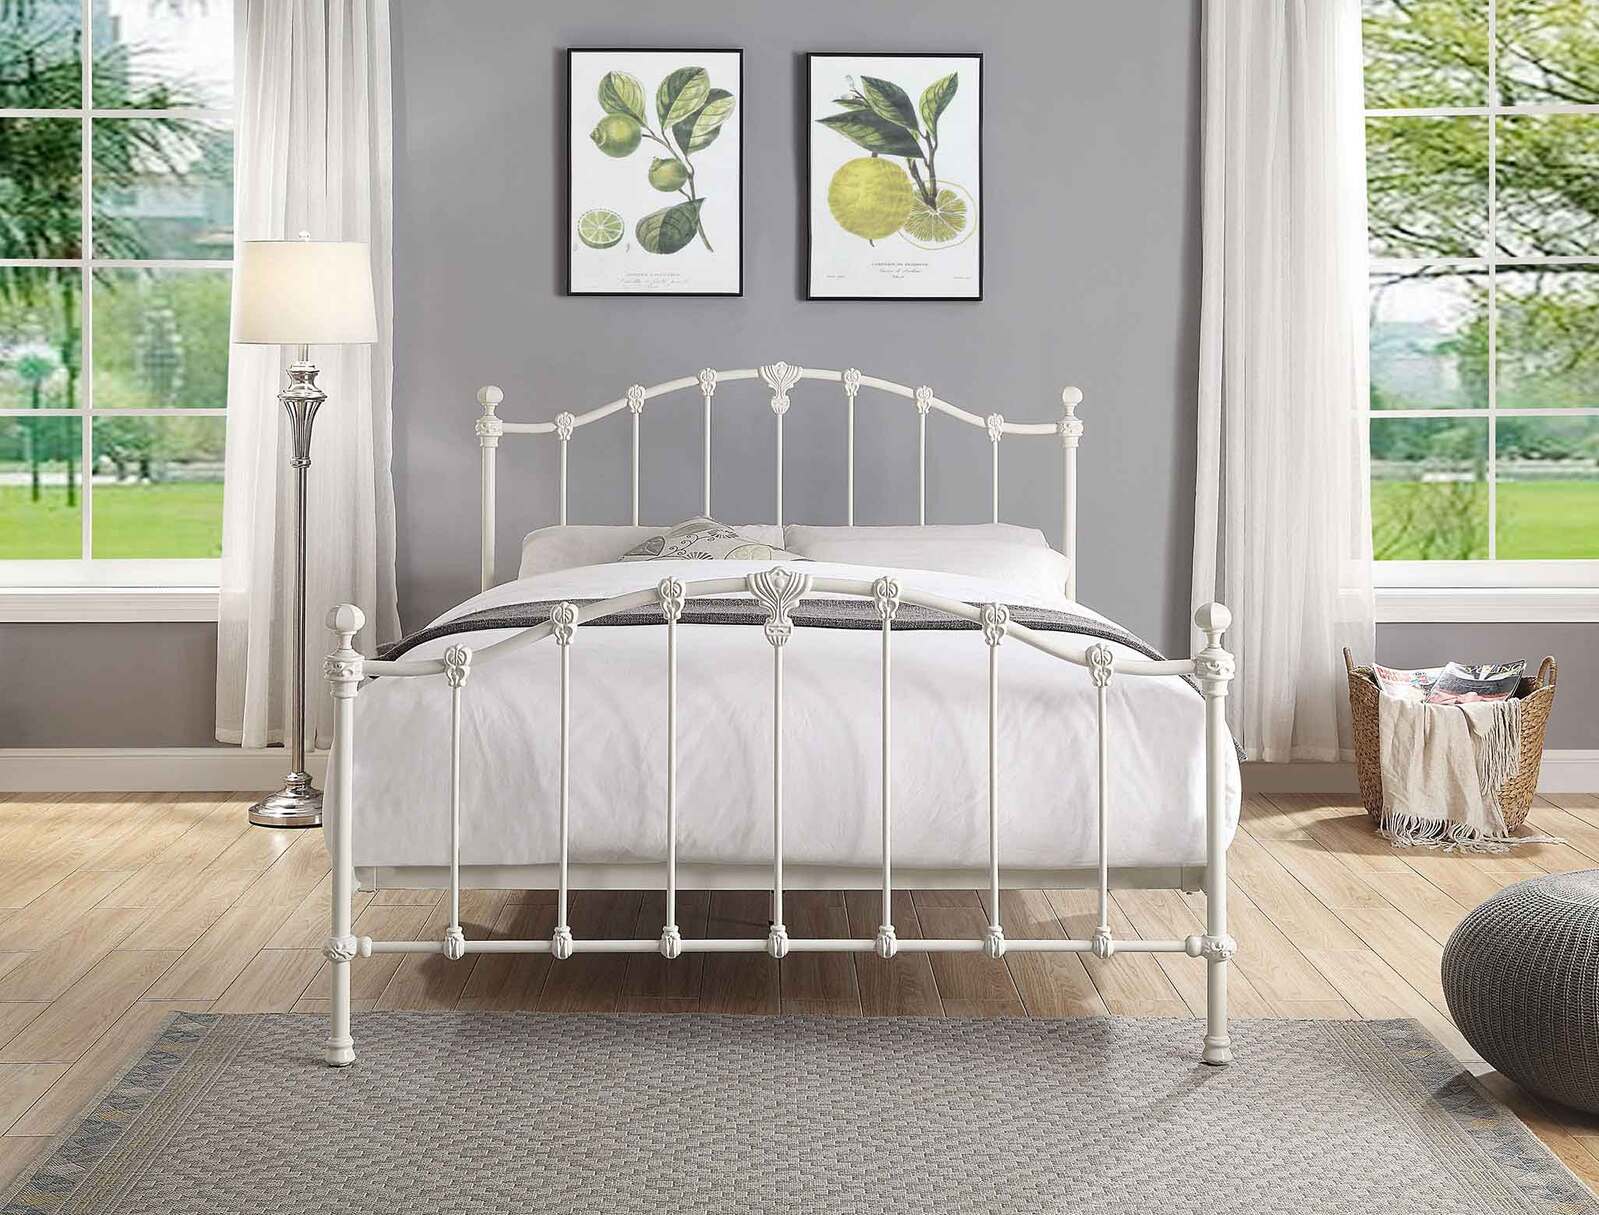 Claremont Cast and Wrought Iron Bed | Double, Queen, Single or King